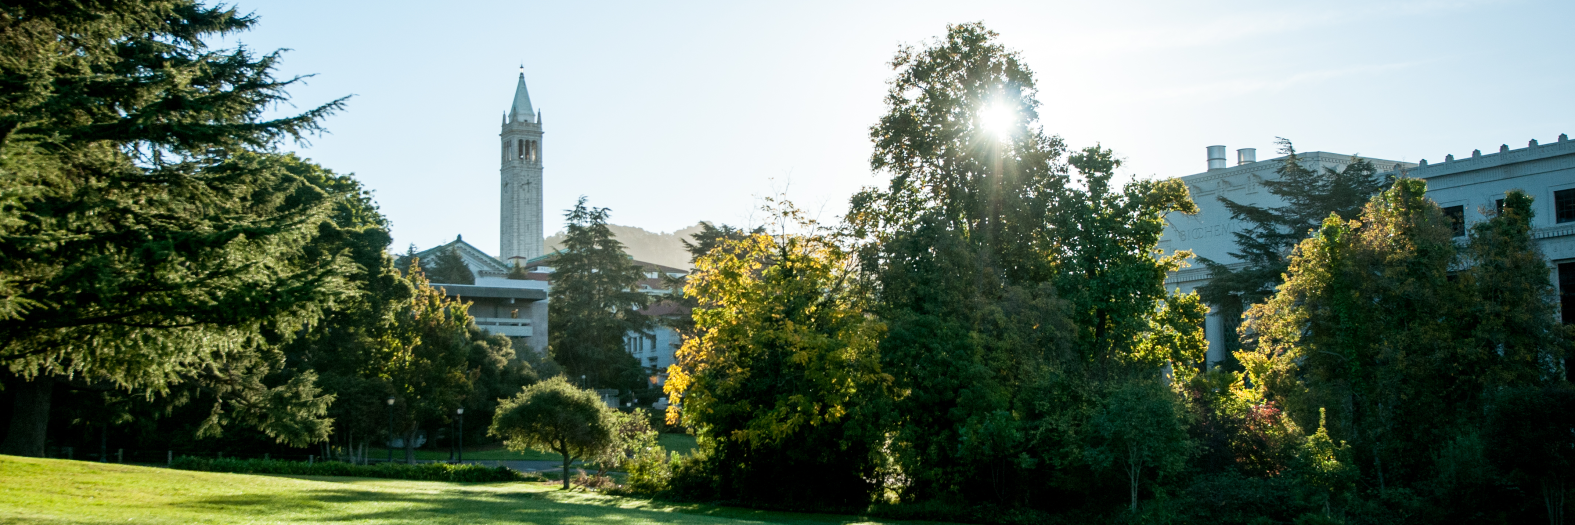 Photo of campus showing grass, trees, and the Campanile. By Keegan Houser.